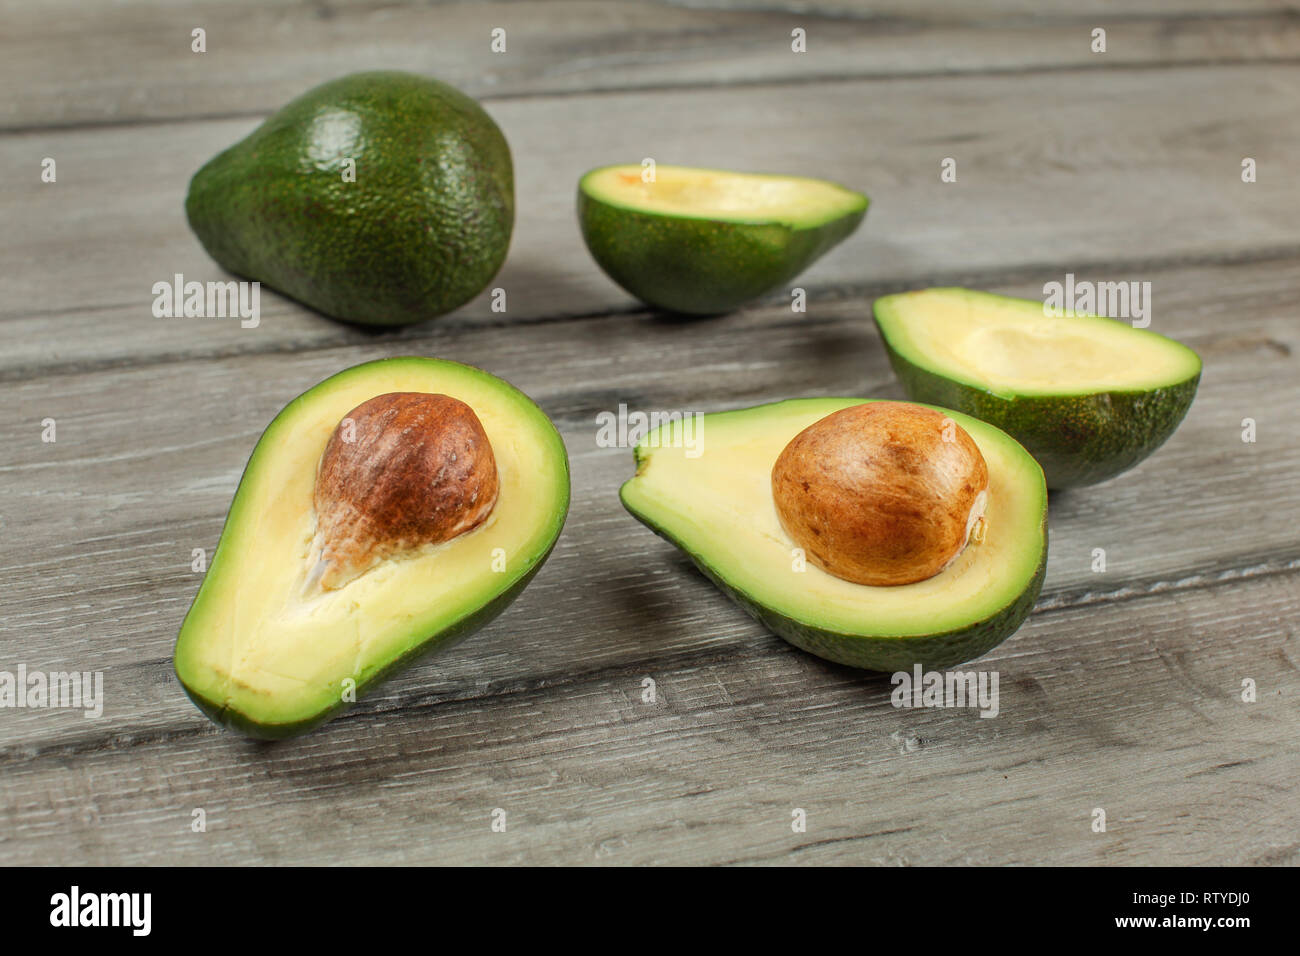 Avocados cut in half seed visible, one whole green pear in background, on  gray wood desk Stock Photo - Alamy